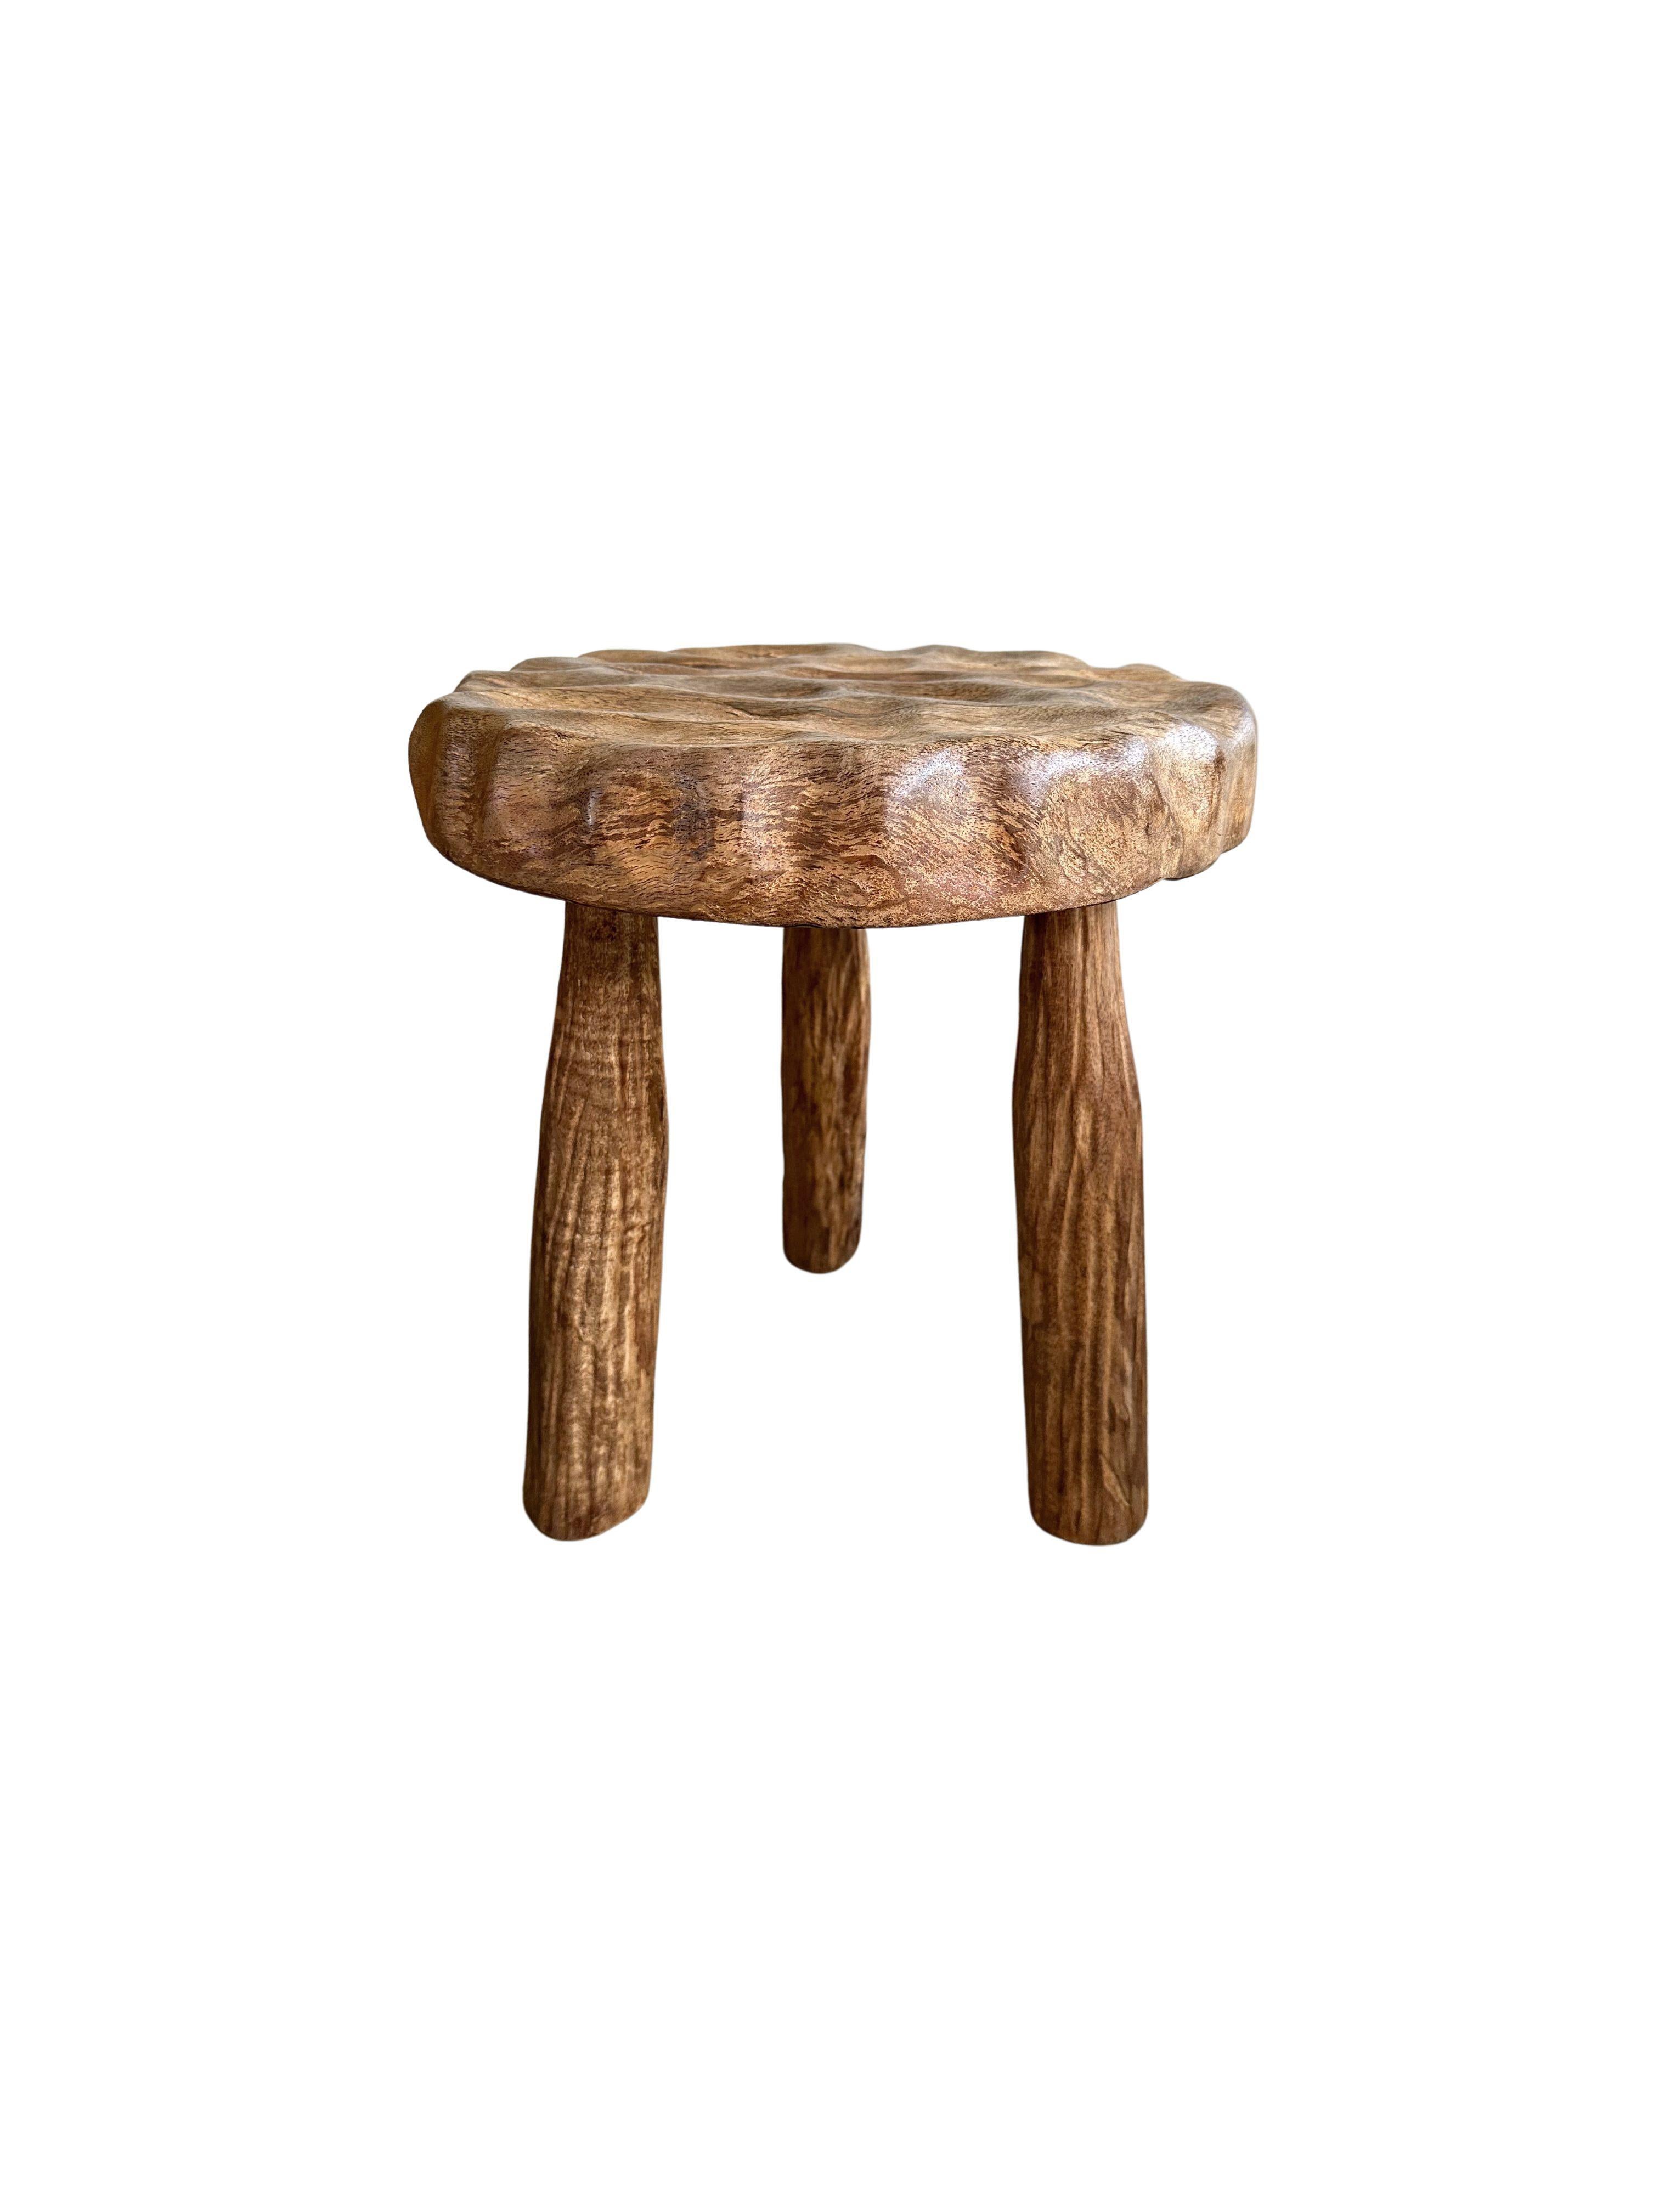 Sculptural Stool Solid Mango Wood, Hand-Hewn Detailing, Modern Organic In Good Condition For Sale In Jimbaran, Bali